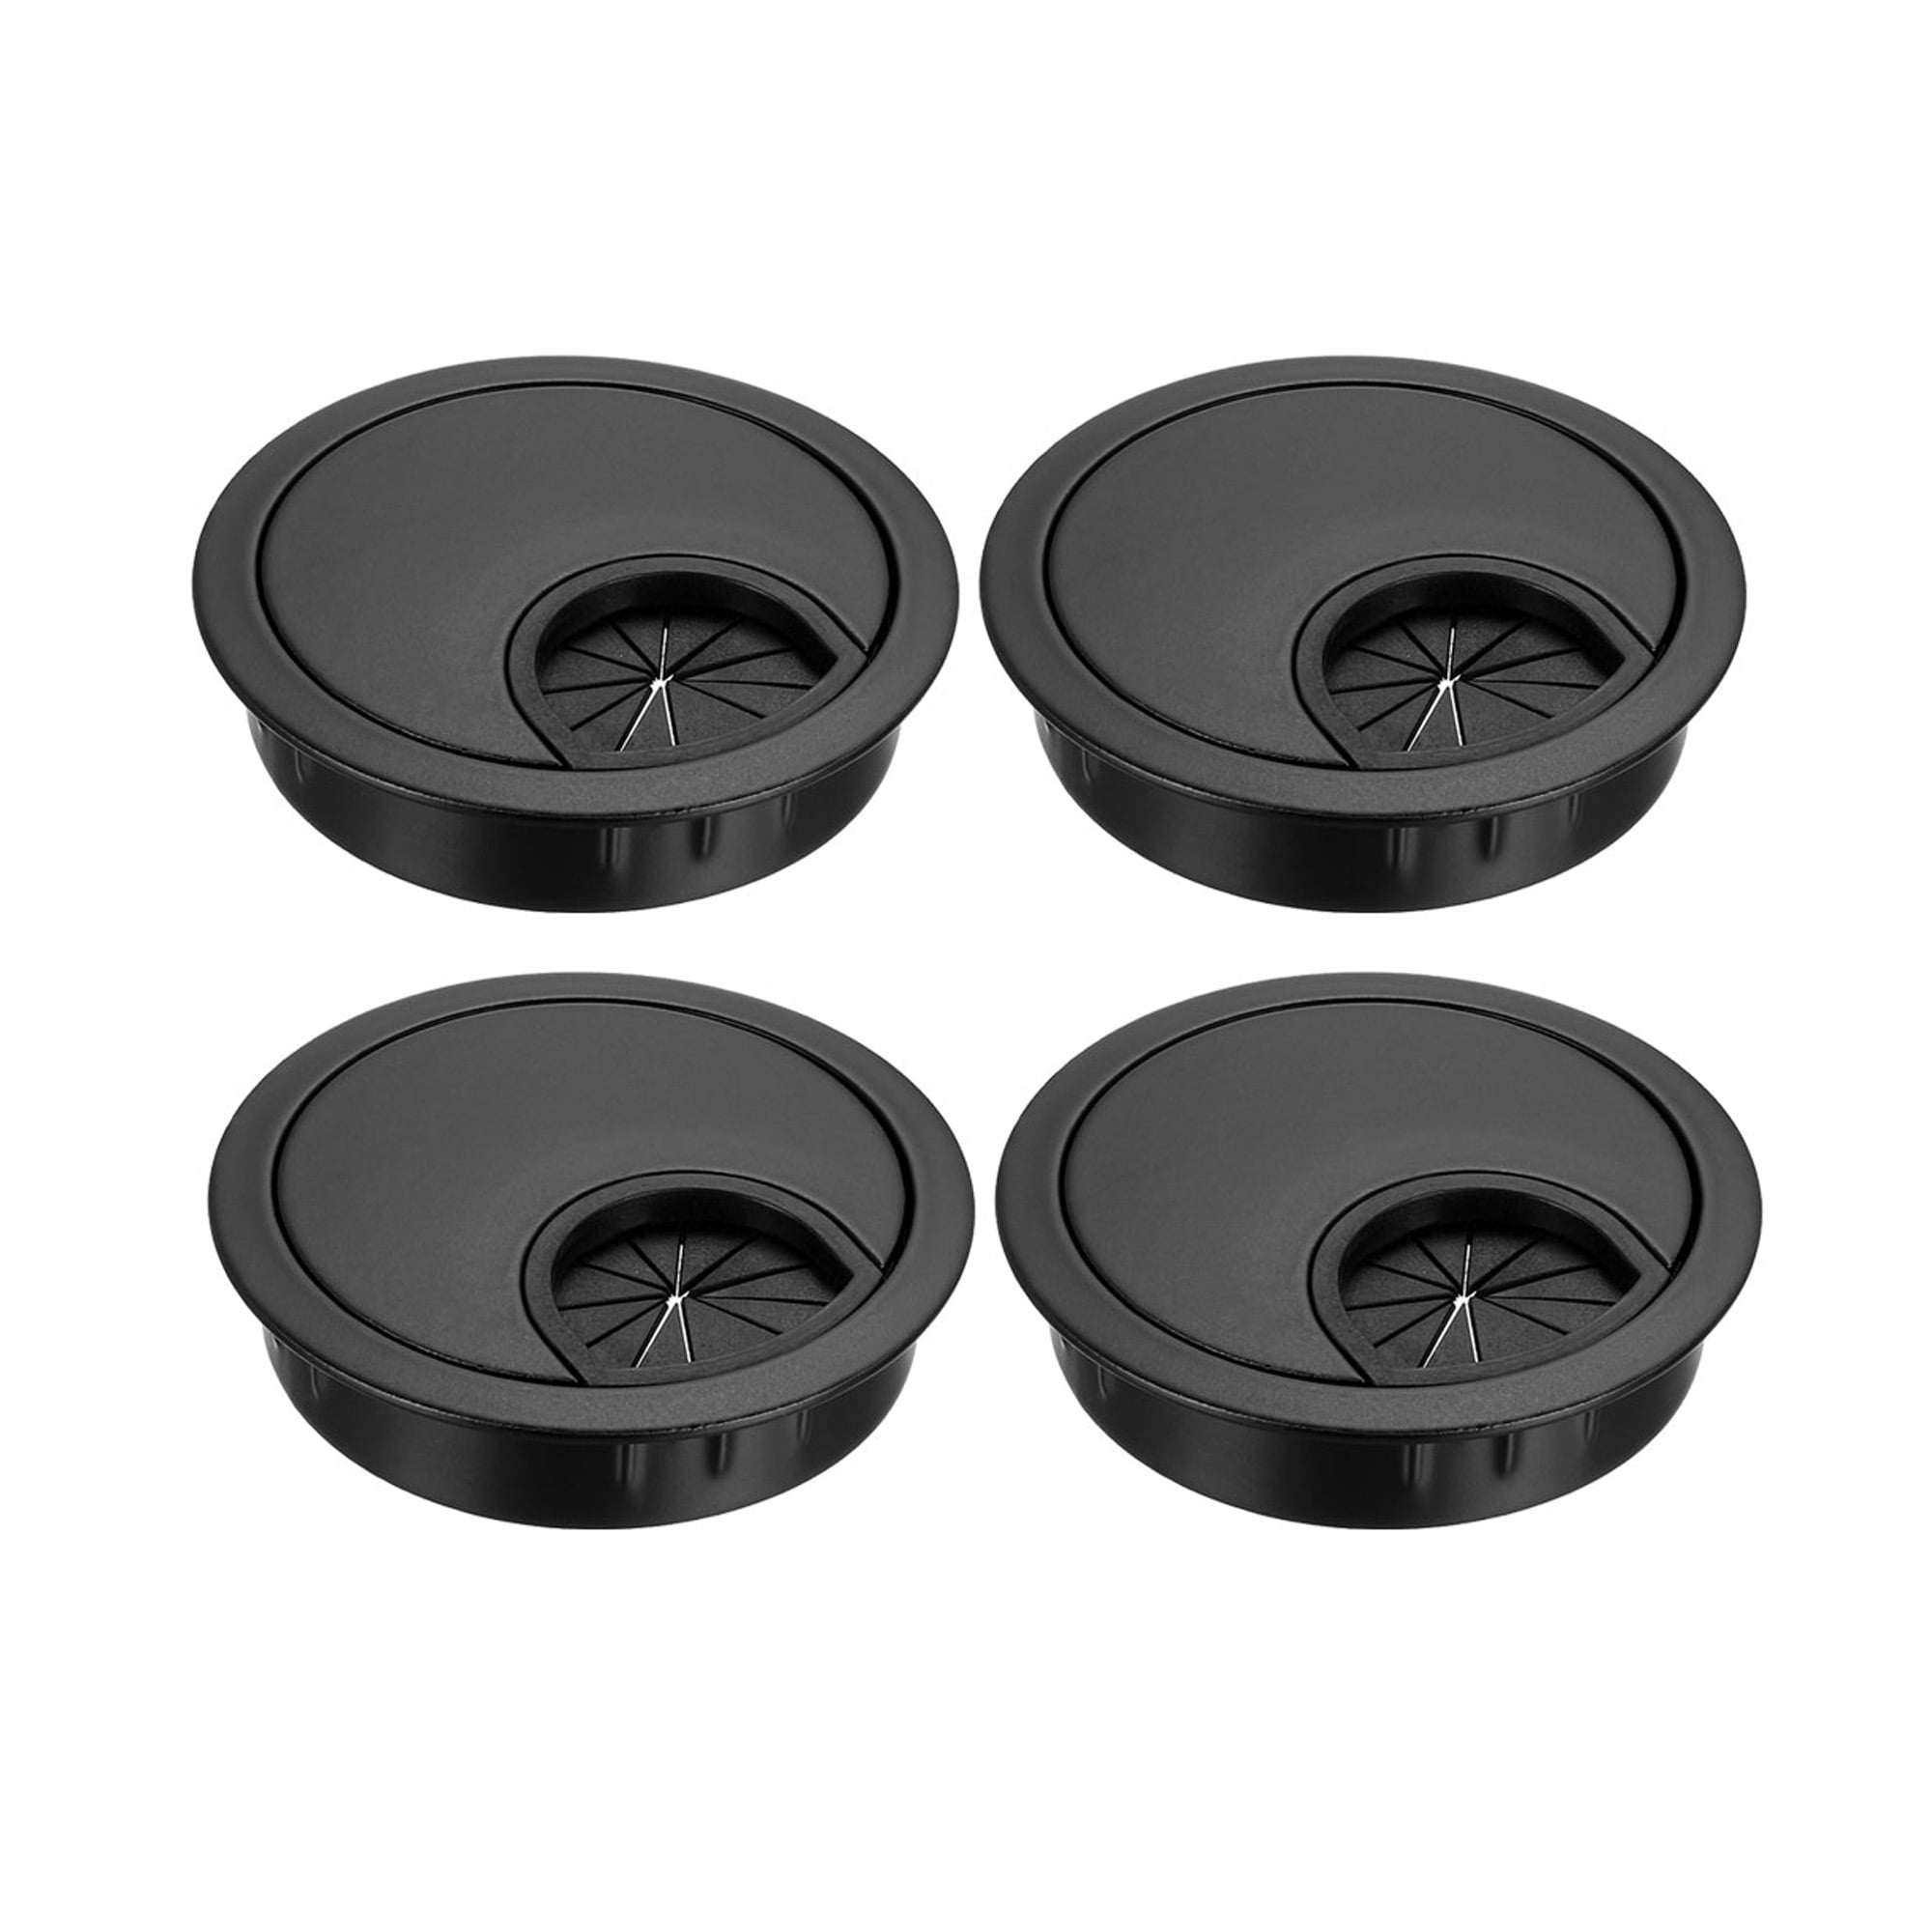 TEHAUX Black Desk Grommet Oval Rubber Wire Cord Cable Grommets Hole Cover fireproof Cable Organizer For Office Home PC Desk Cable Cord Cover Black 4Pcs 